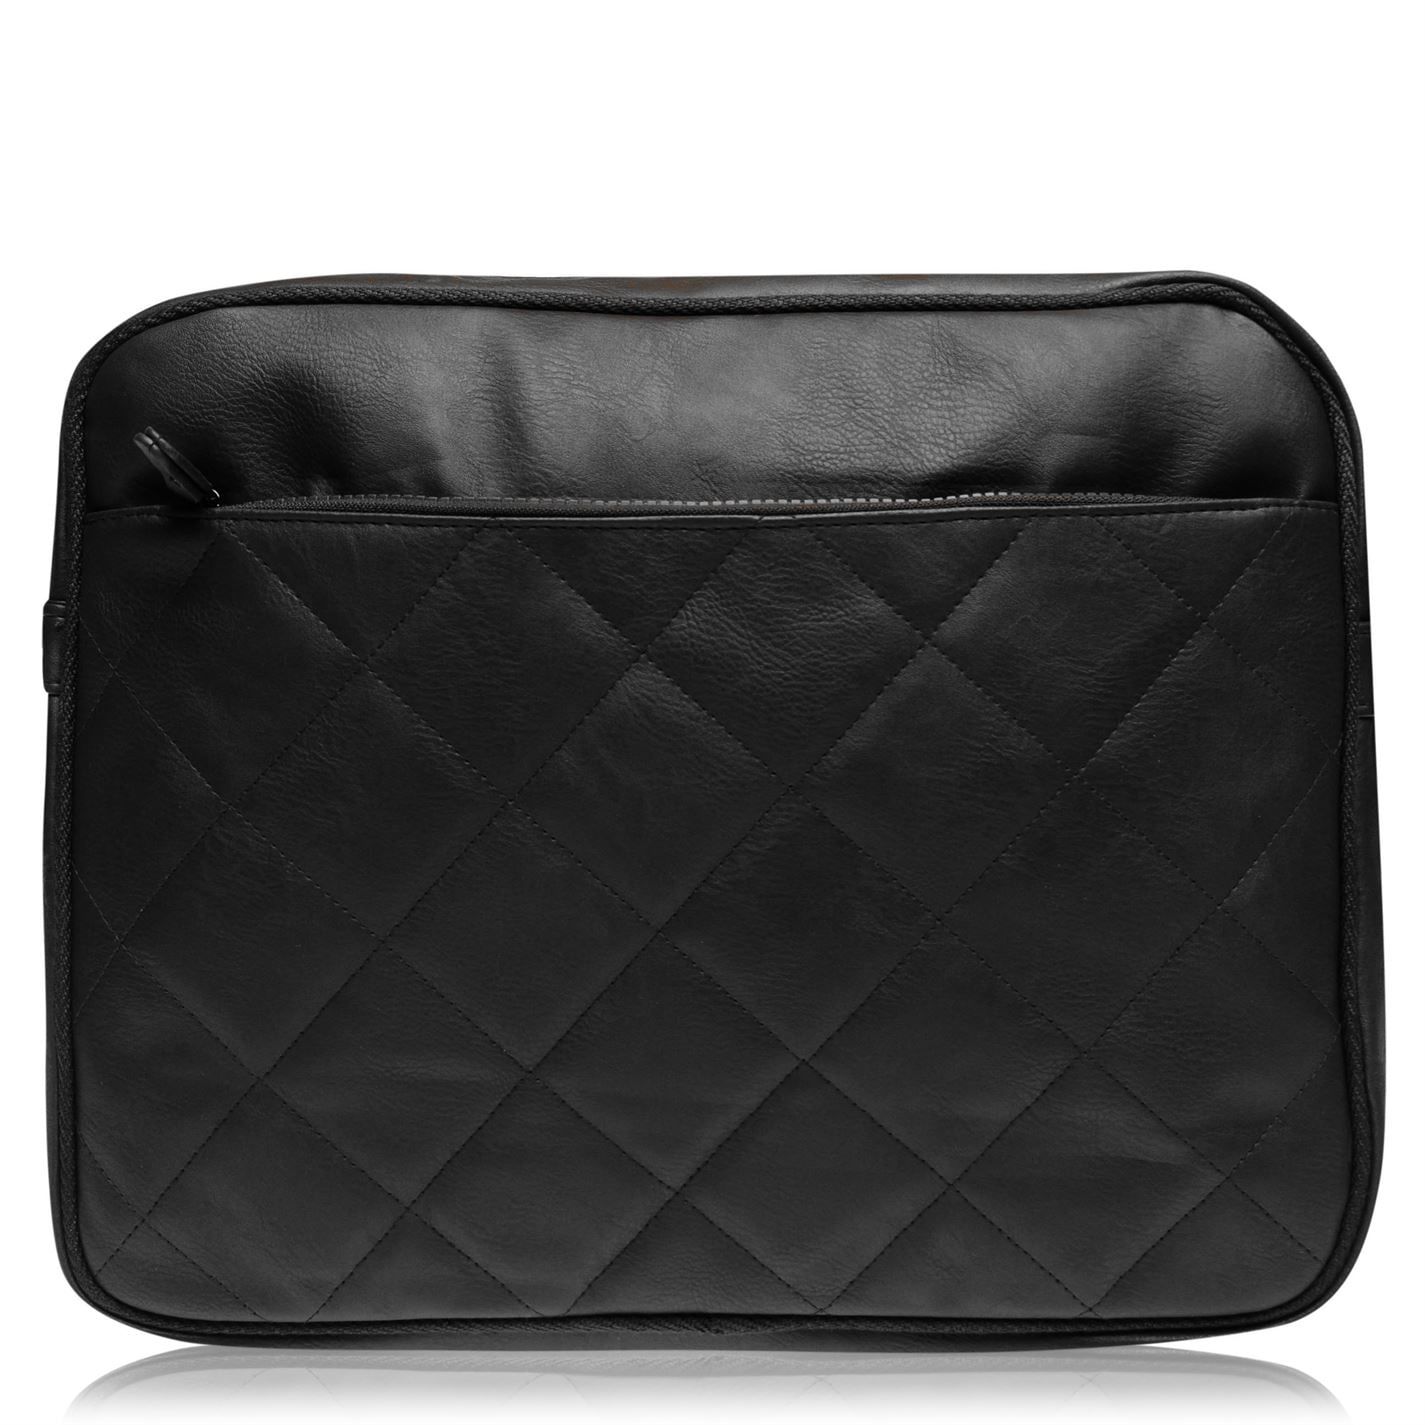 <strong>Firetrap Quilted Flight Bag</strong><br><br> Travel with ease with the Firetrap Quilted Flight Bag over your shoulder. The ideal size for storing your travel documents and valuables, the quilted construct features a main zip compartment, with a front and back zip pocket. The bag has a Firetrap branded shoulder strap for logo to the front for brand recognition.<br>> Flight bag<br>> Main zip fastening<br>> Front zip compartment<br>> Quilted construct<br>> Firetrap branded shoulder strap<br>> Back zip compartment<br>> Firetrap branding<br>> 100% PVC<br>> Hand wash only<br>> H 30 x W 36 x D 12 cm